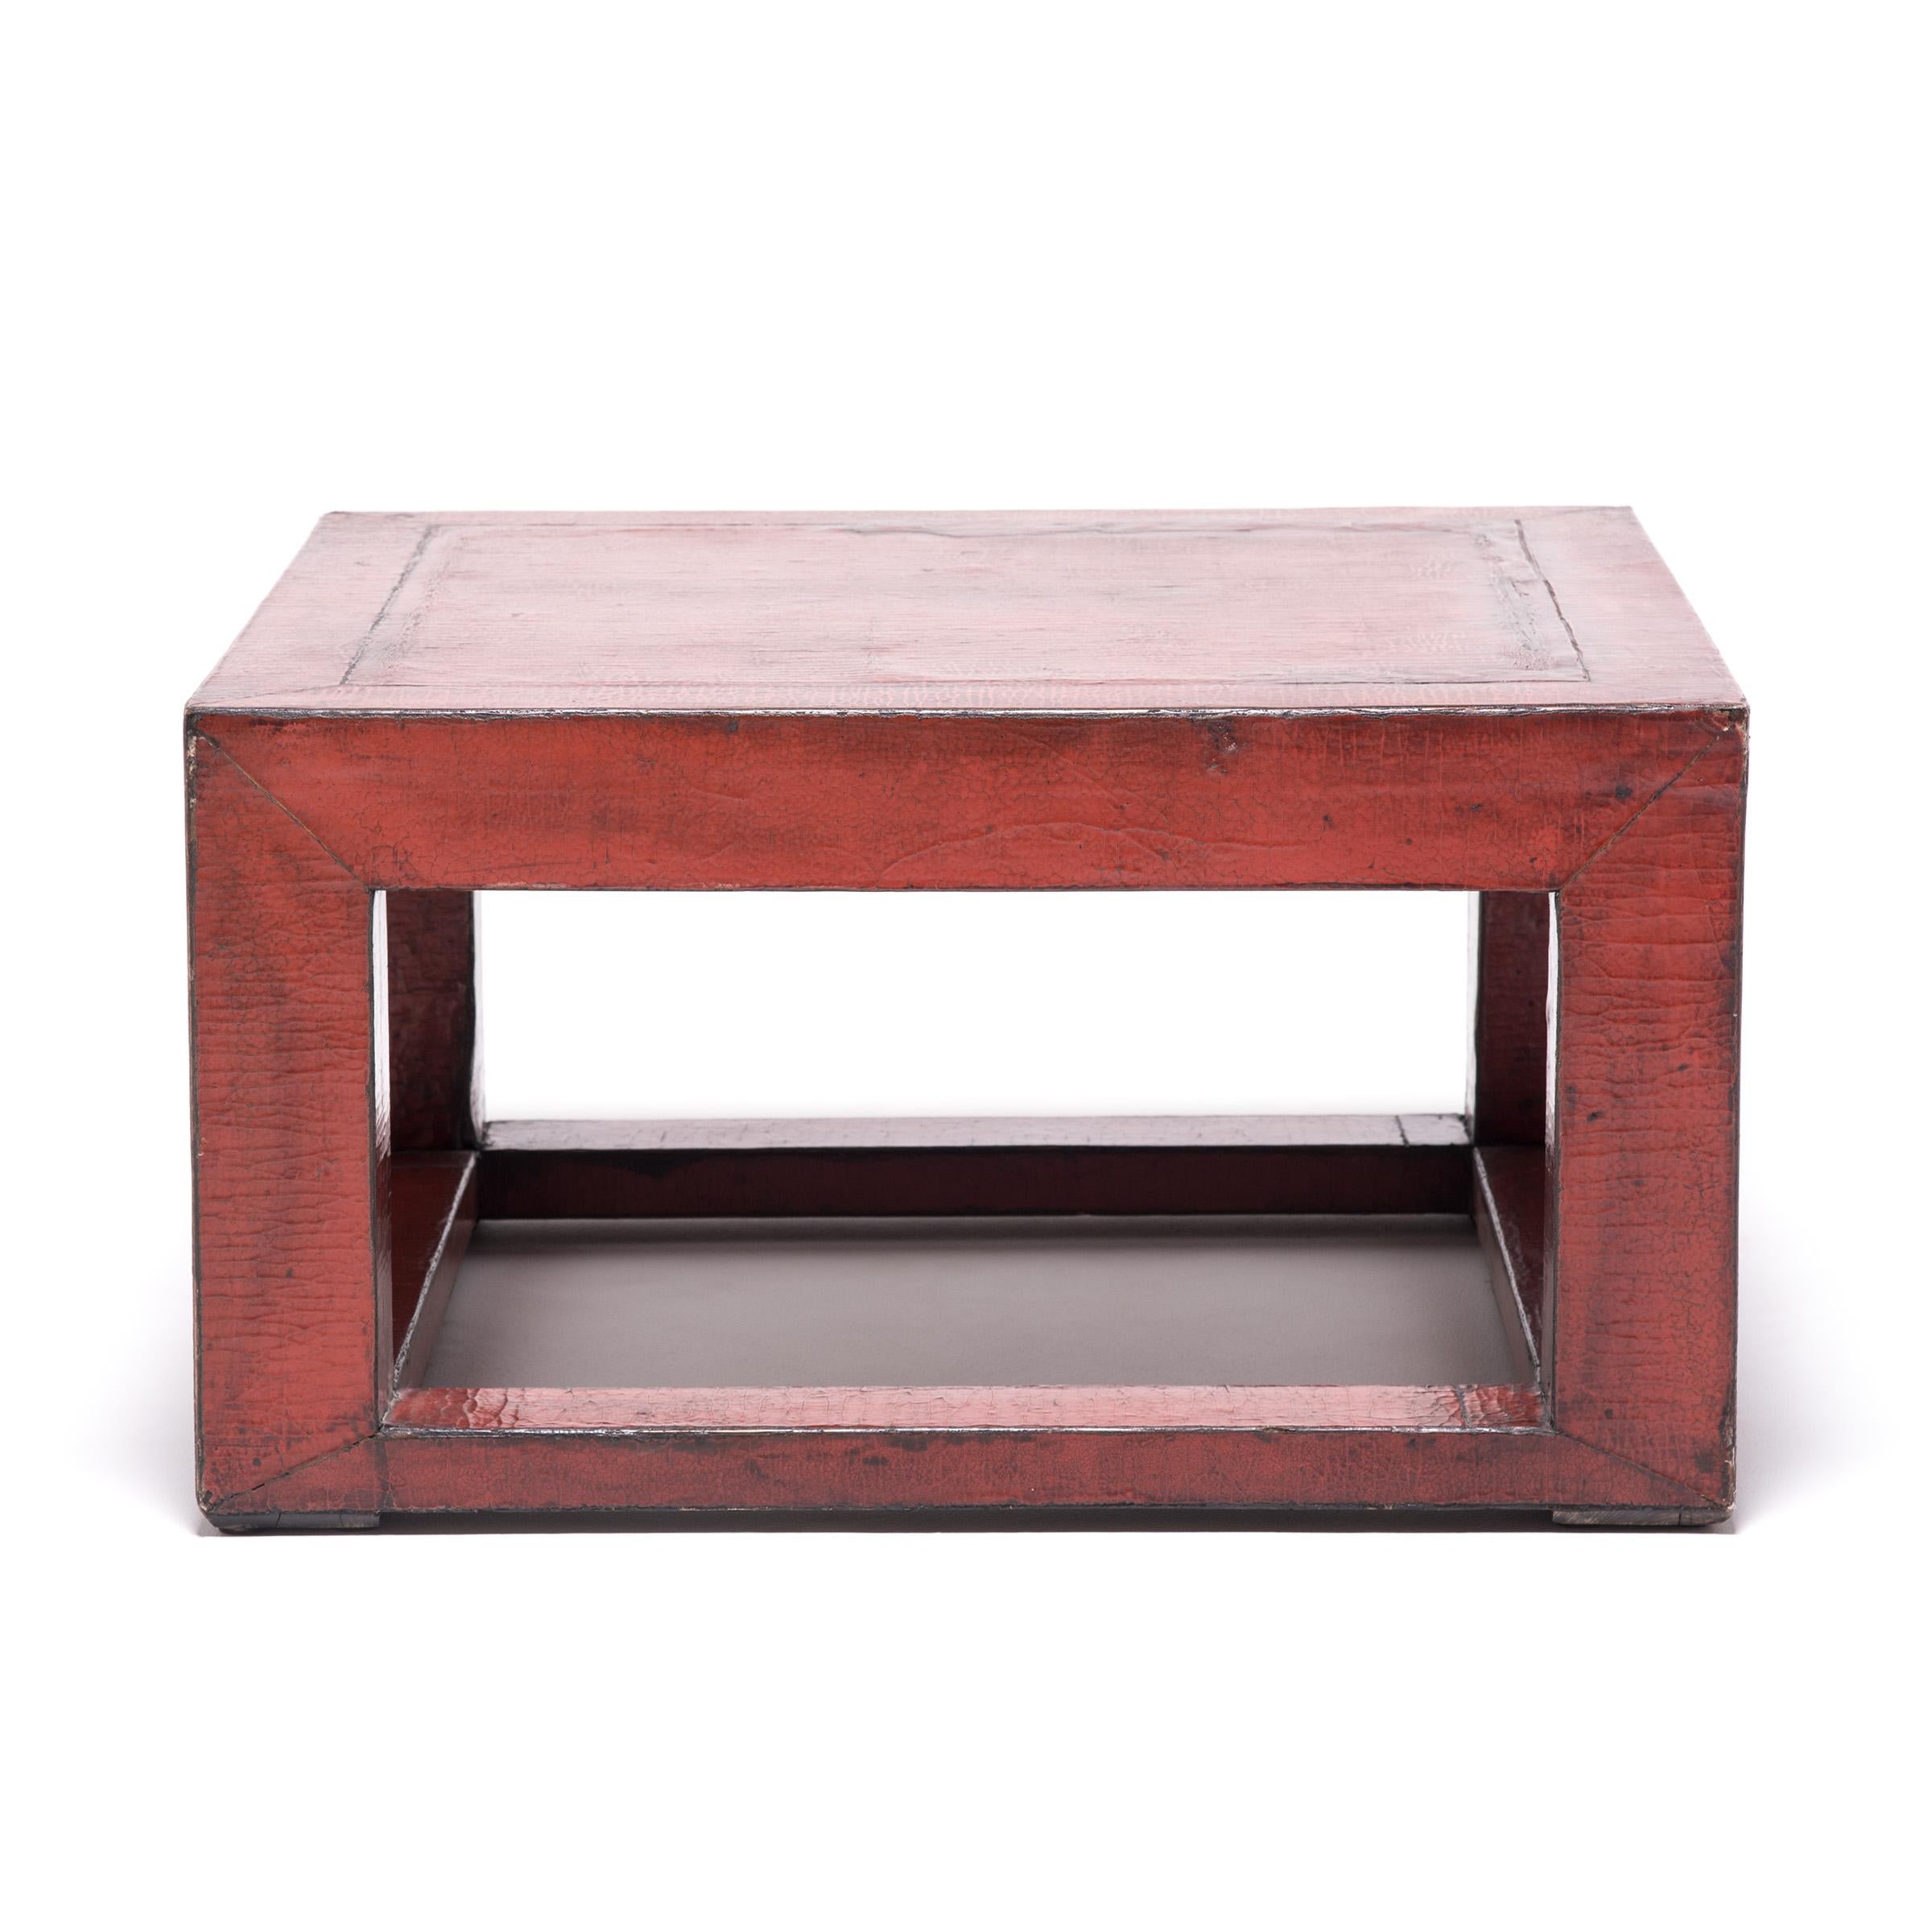 Modern Red Lacquer Square Platform Table